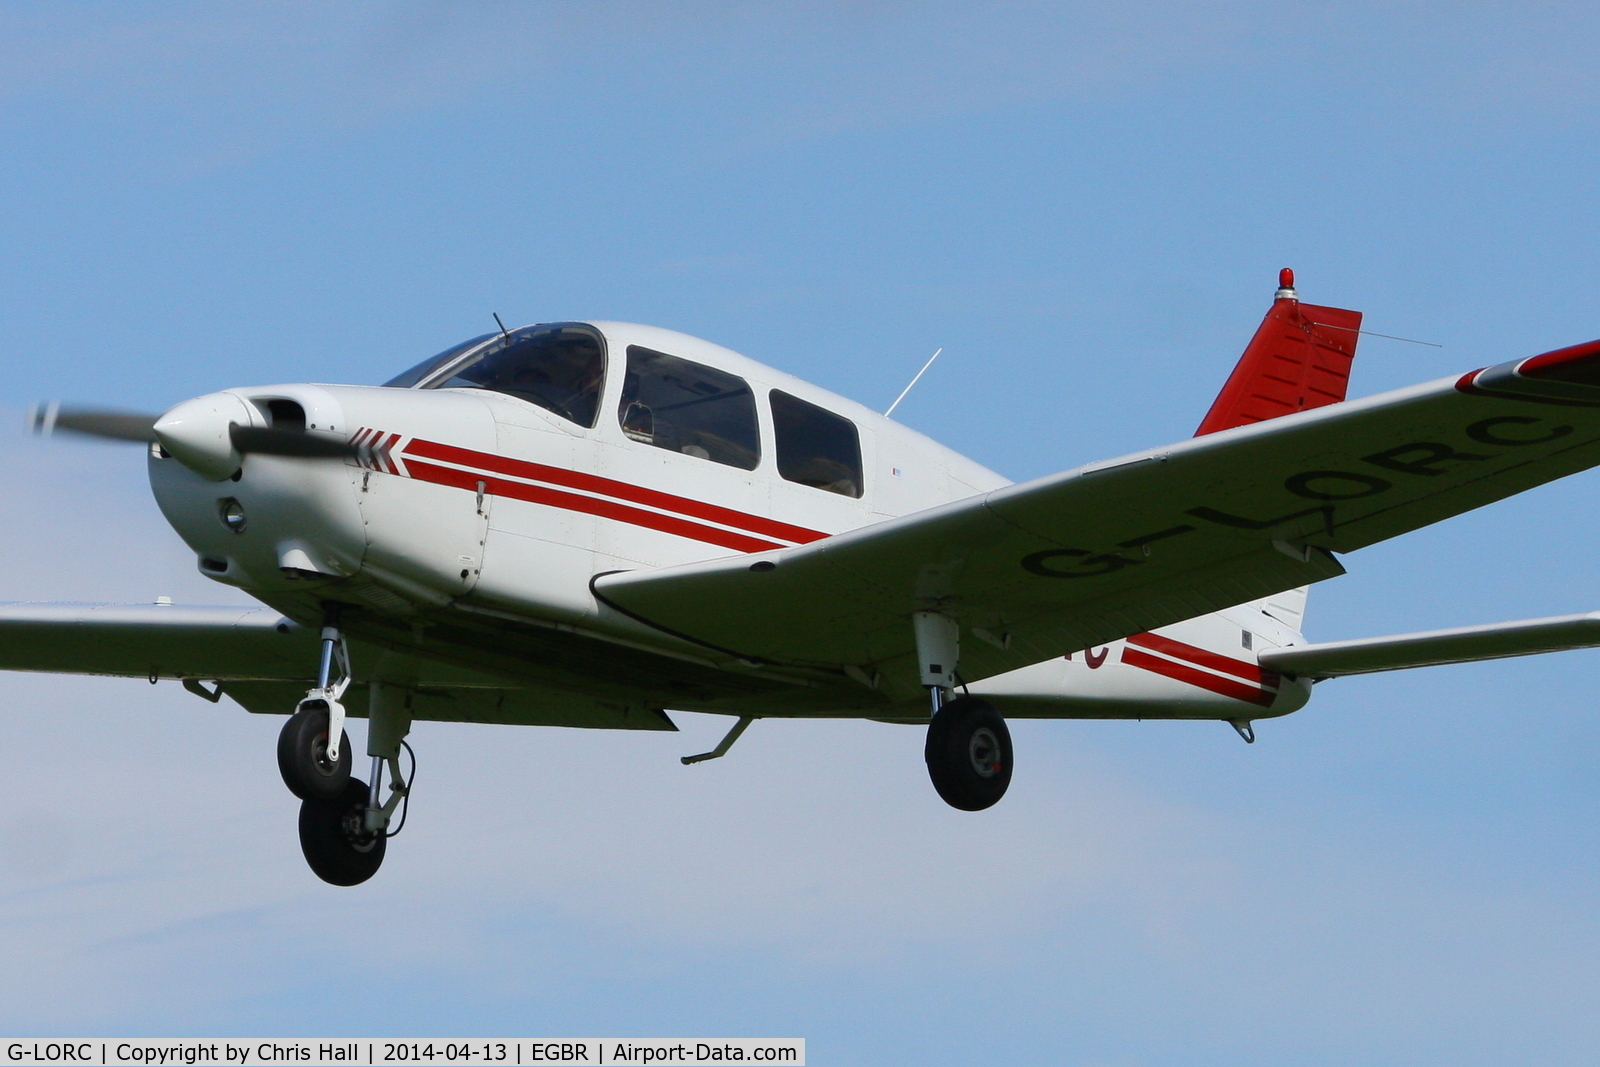 G-LORC, 1992 Piper PA-28-161 Cadet C/N 2841339, at Breighton's 'Early Bird' Fly-in 13/04/14